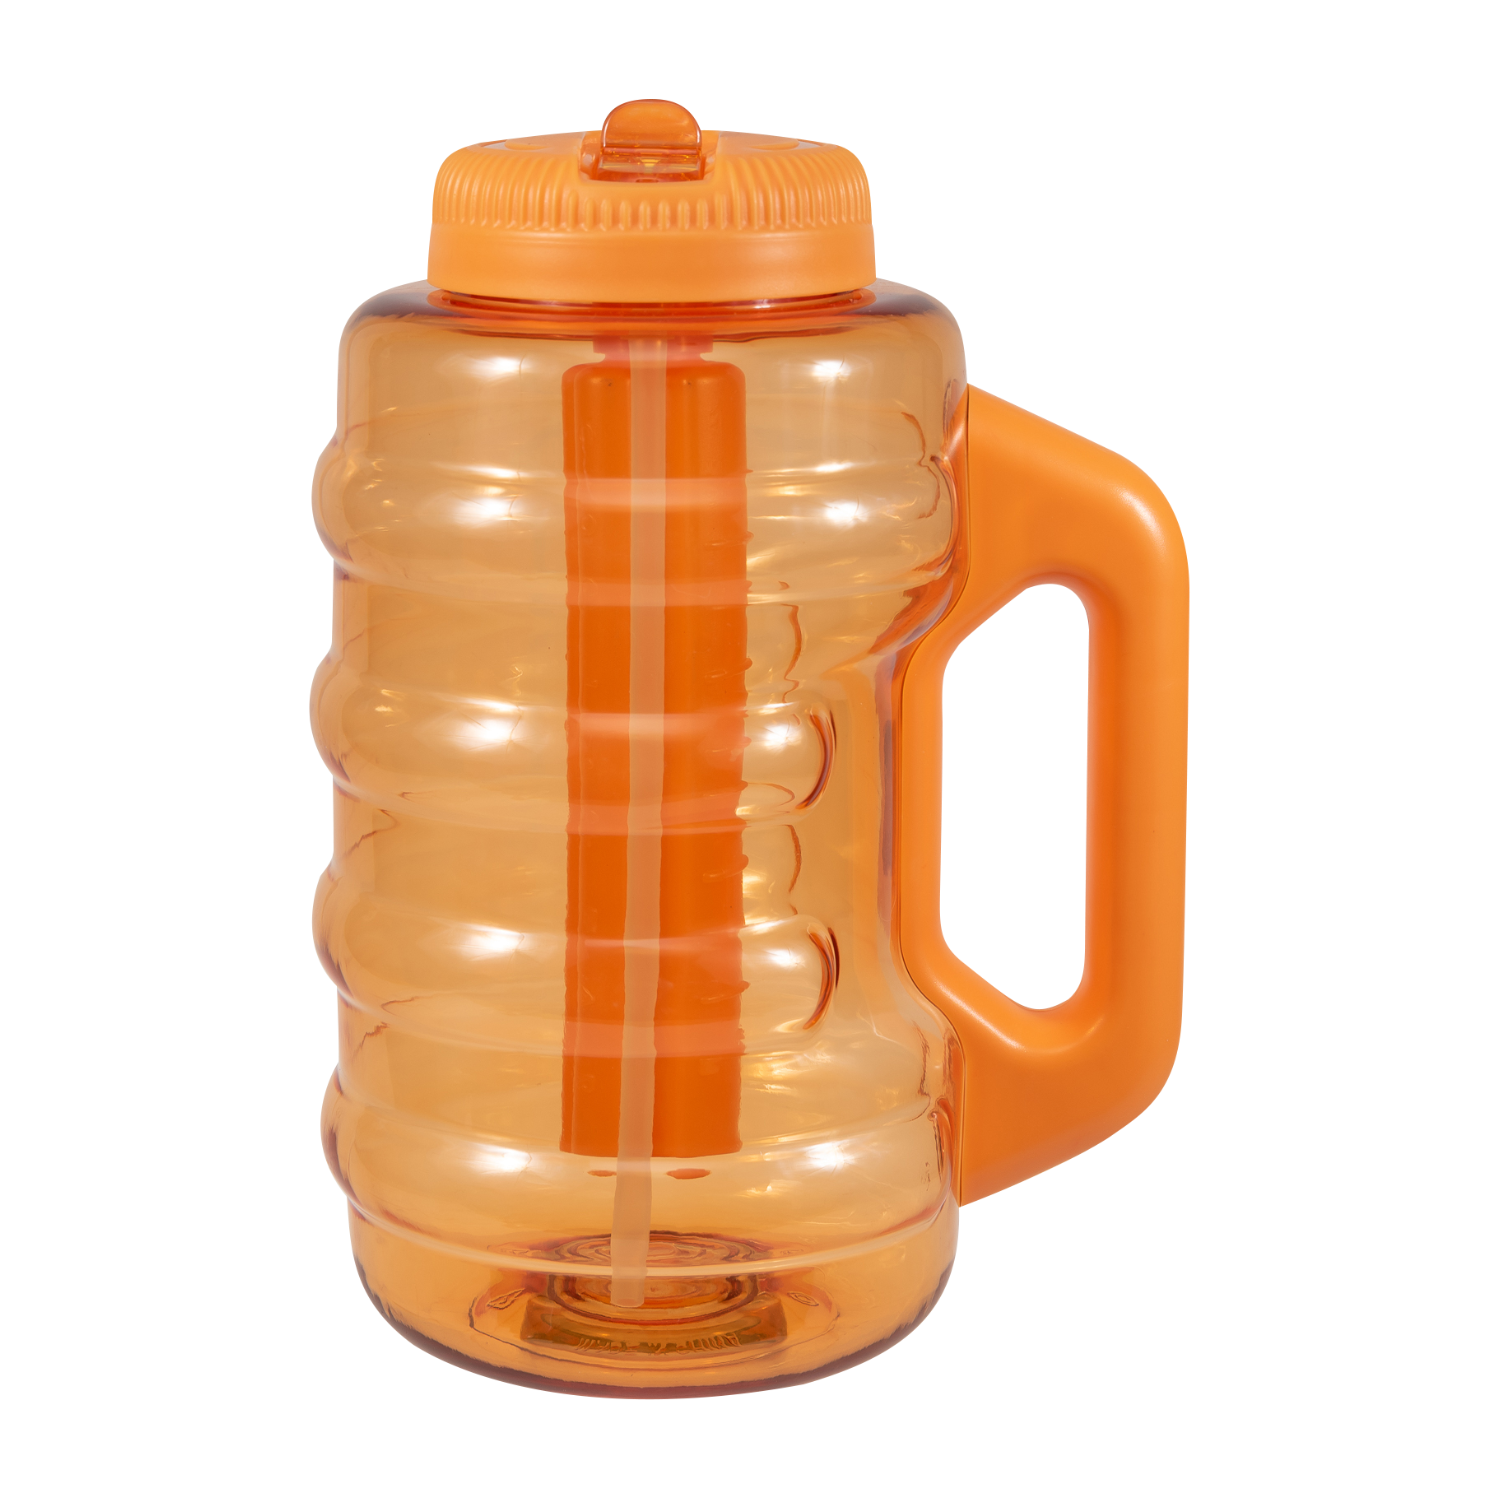 Water Bottle 2 in 1 Coffee Mug Cold Hot Travel Cup Drink Beverage Container